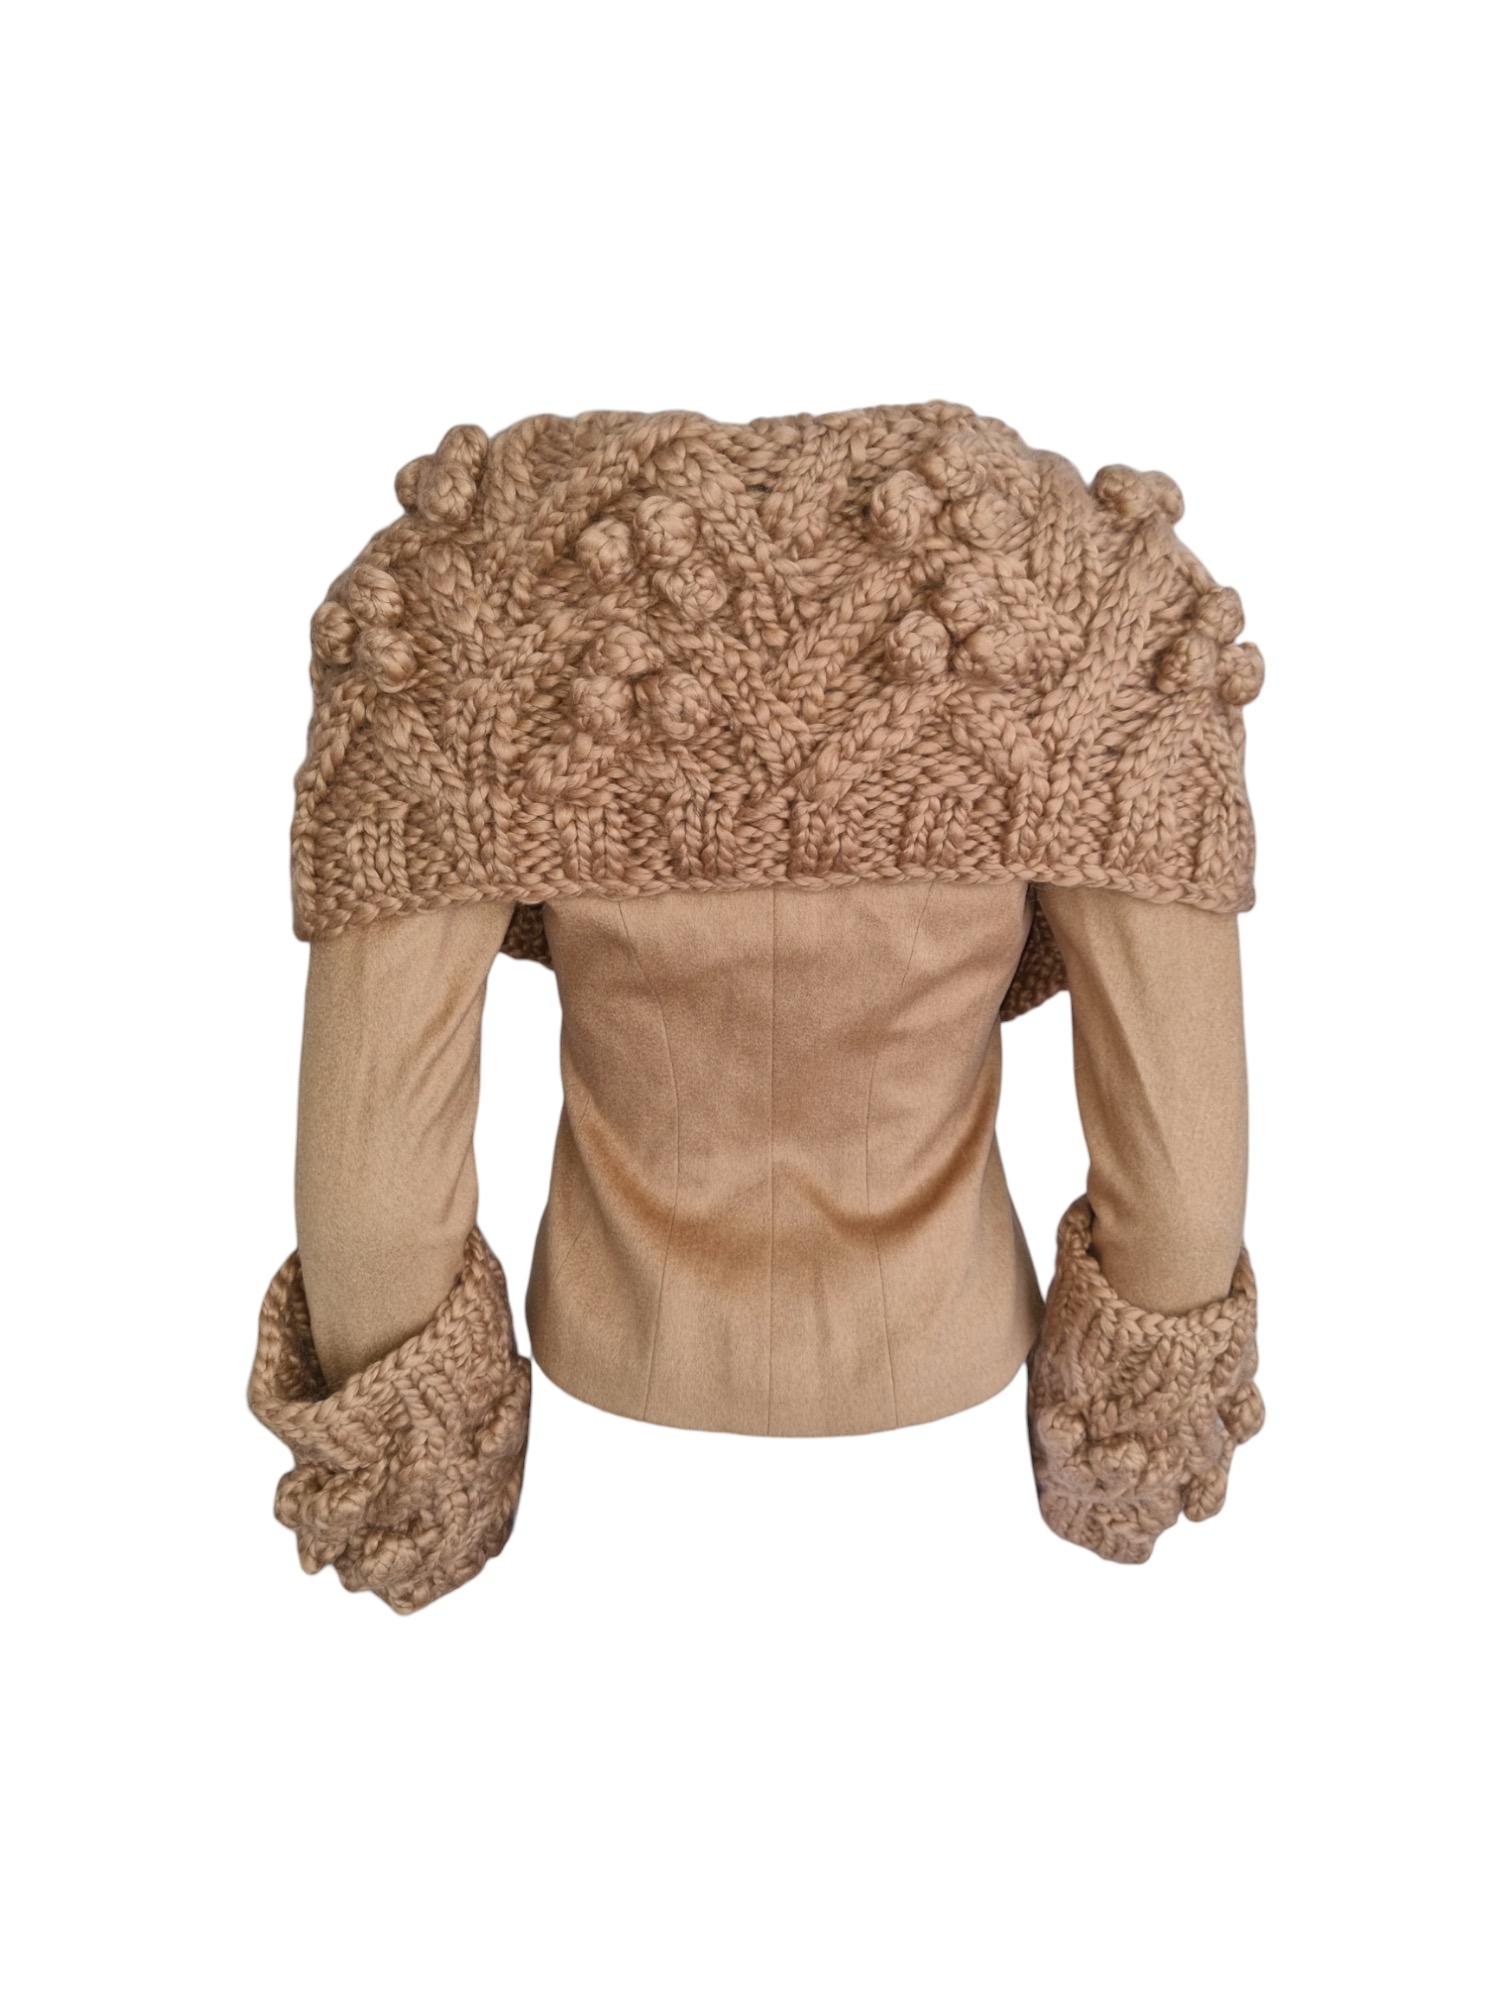 MyRunwayArchive presents this vintage blazer features an oversized shawl collar and cuffs in chunky-knit with pom-poms. A camel wool stands out for its unique texture, exceptional insulation, lightweight feel, and timeless elegance. It offers warmth